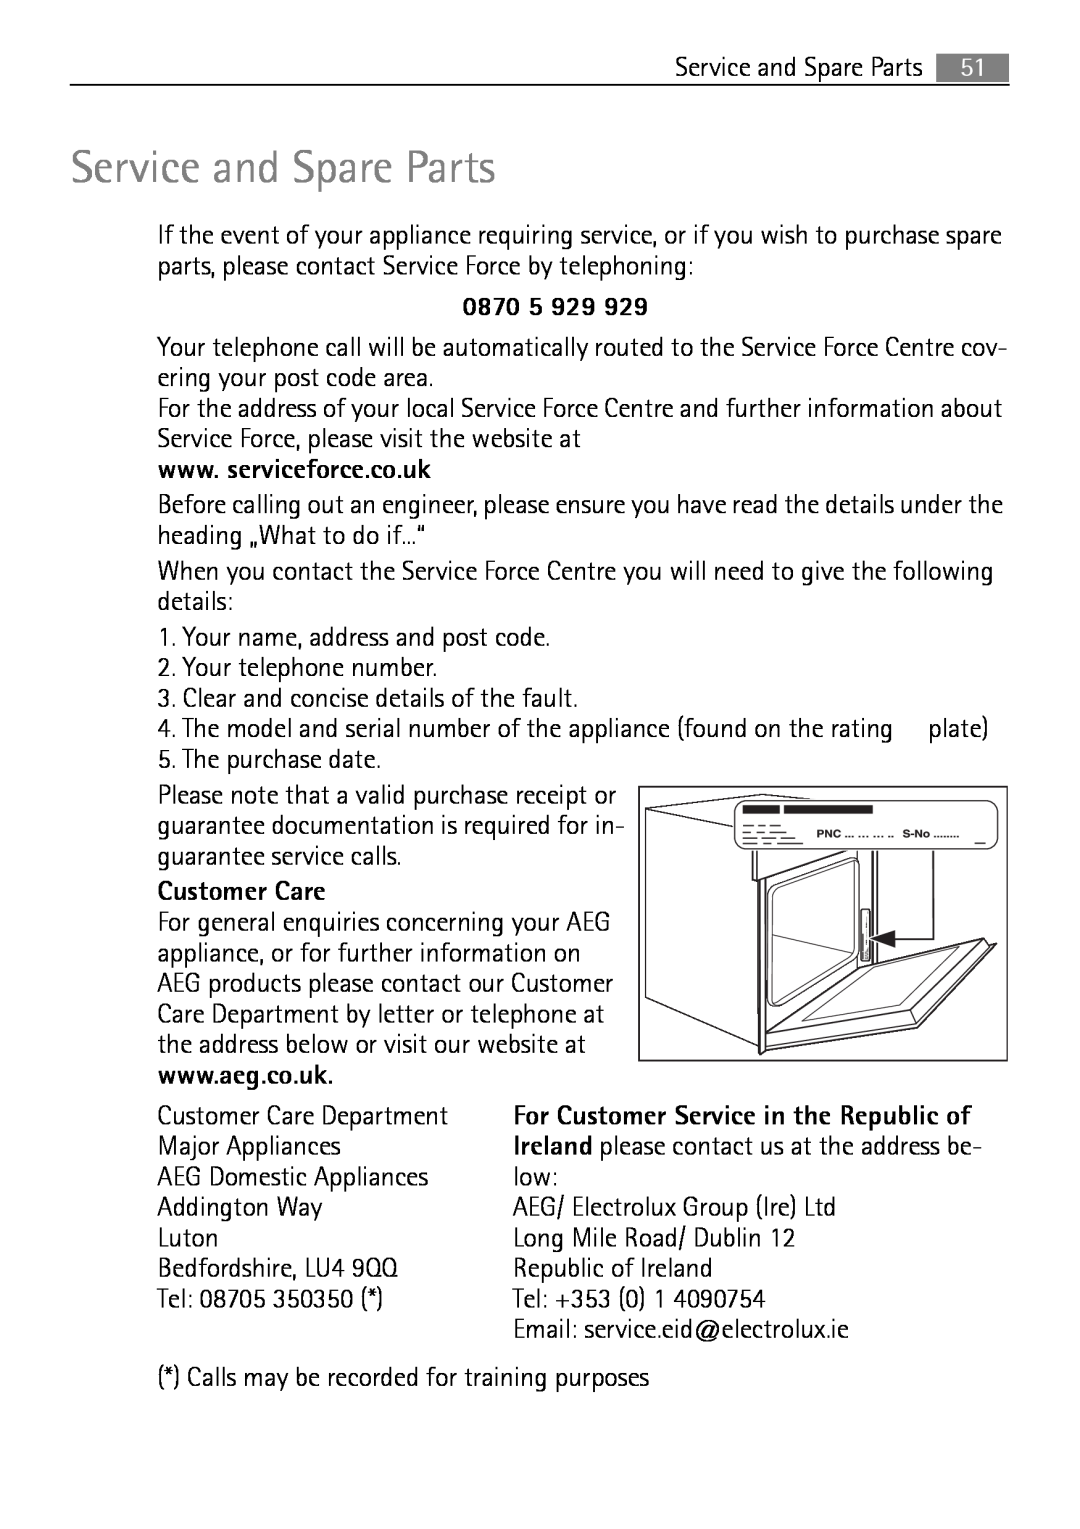 Electrolux B2100-5 user manual Service and Spare Parts, 0870 5 929, Customer Care 